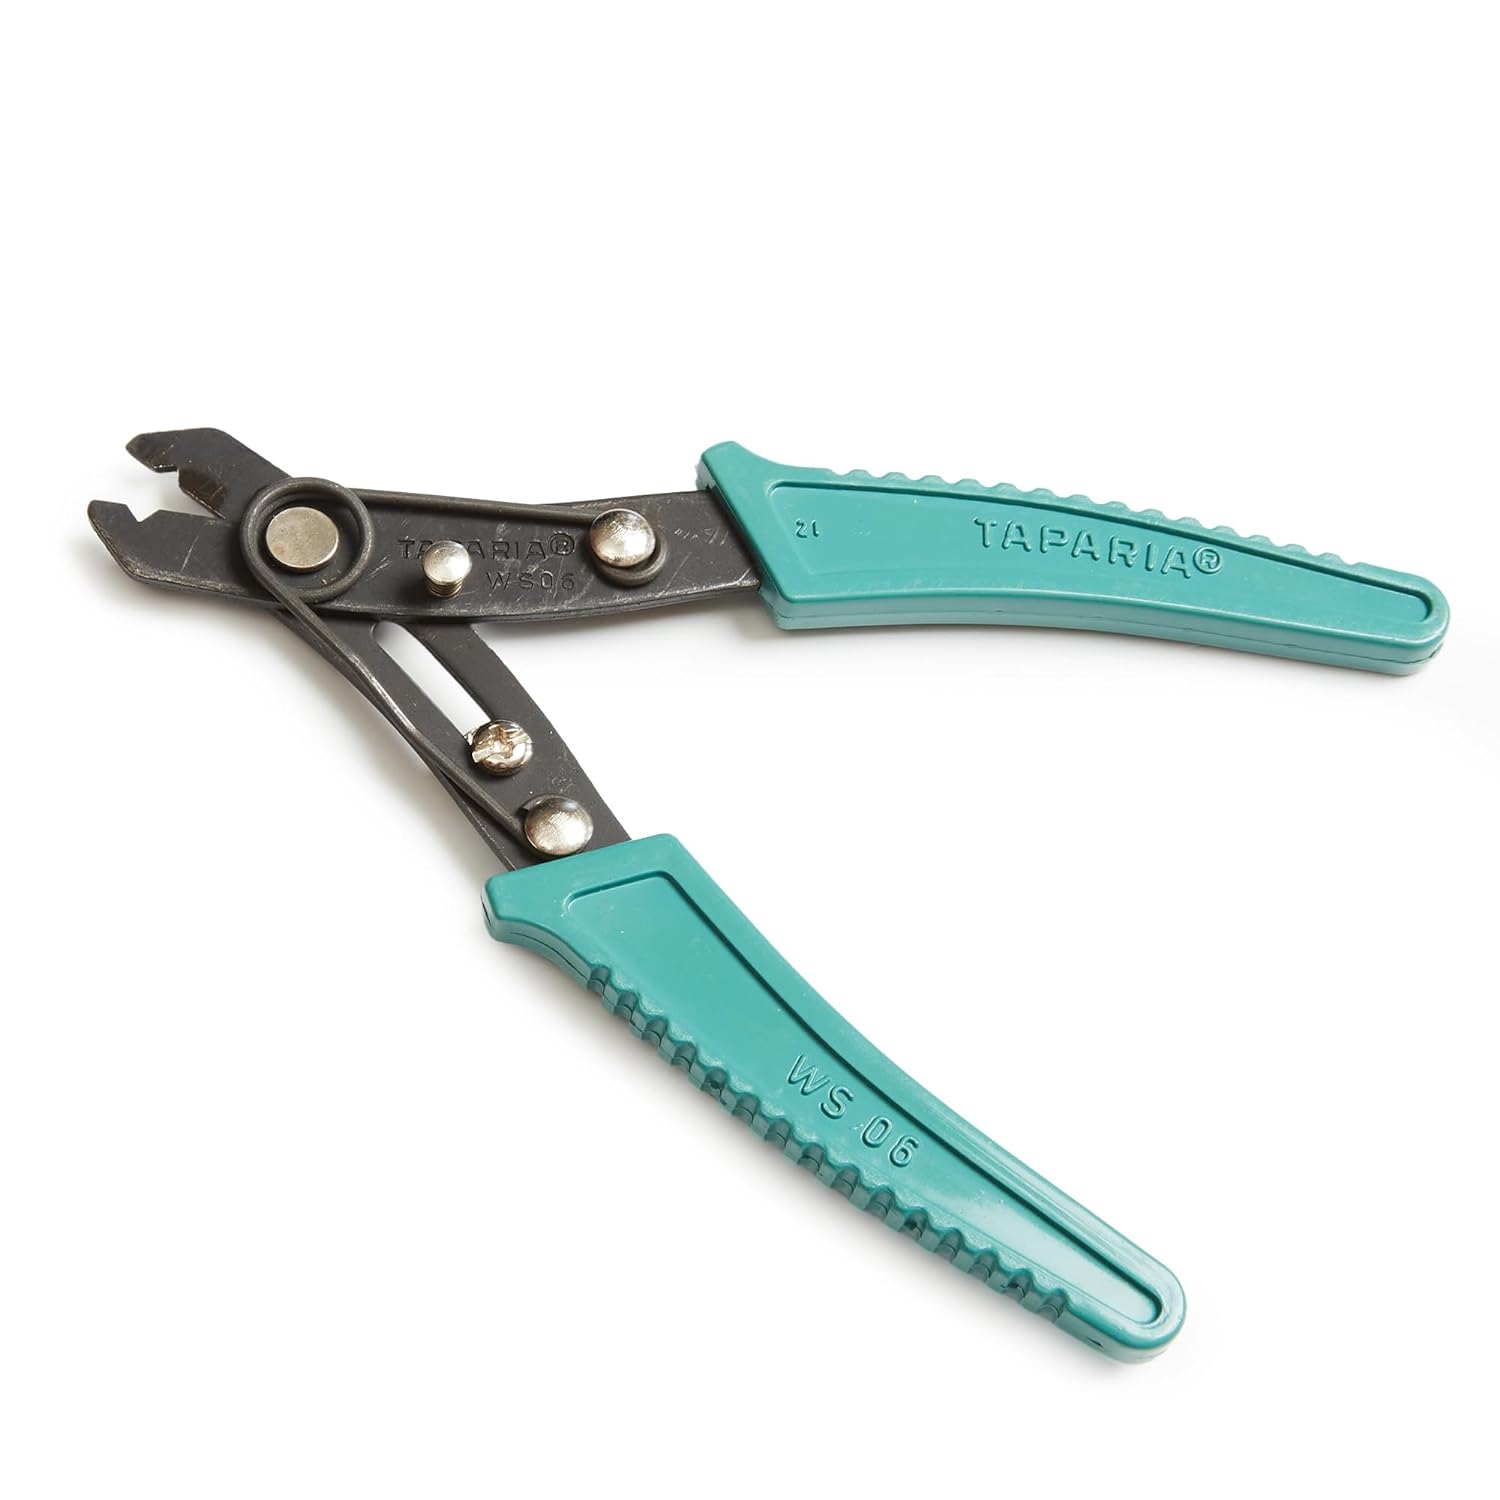 Taparia WS06 Wire Stripping Plier cutter hand tool for home use (Green & Black)